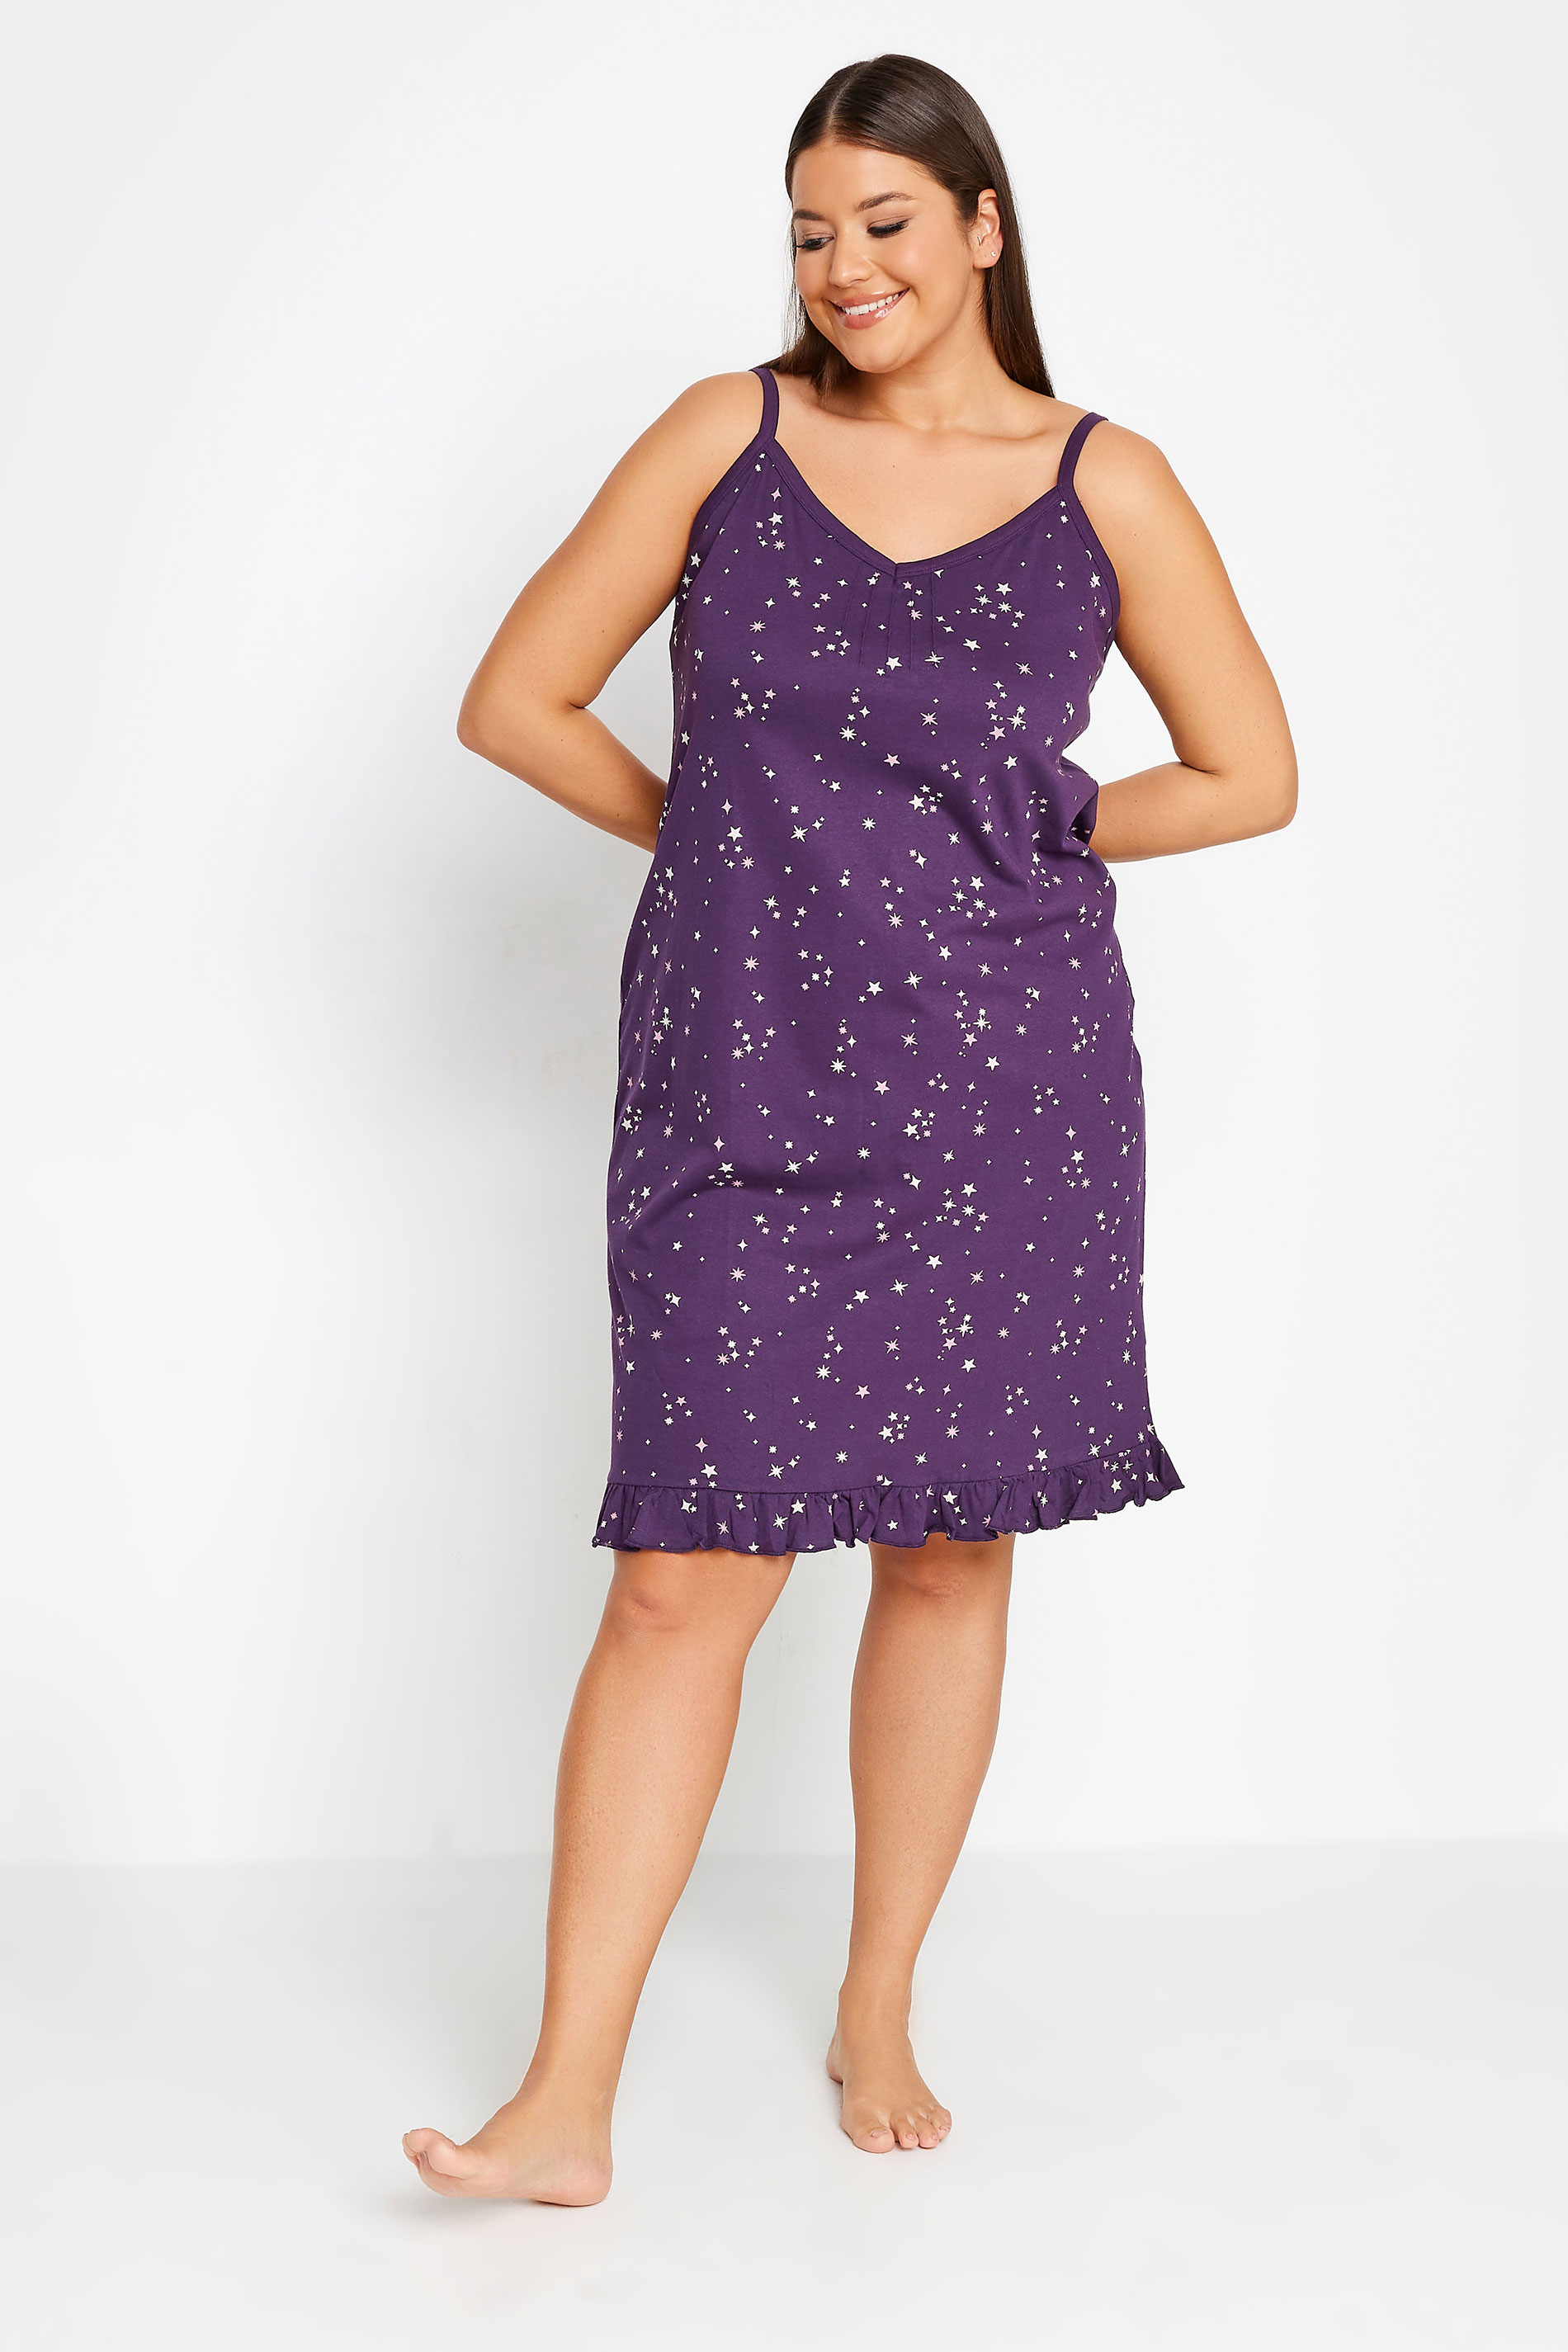 YOURS Plus Size Purple Star Print Chemise Nightdress | Yours Clothing 2